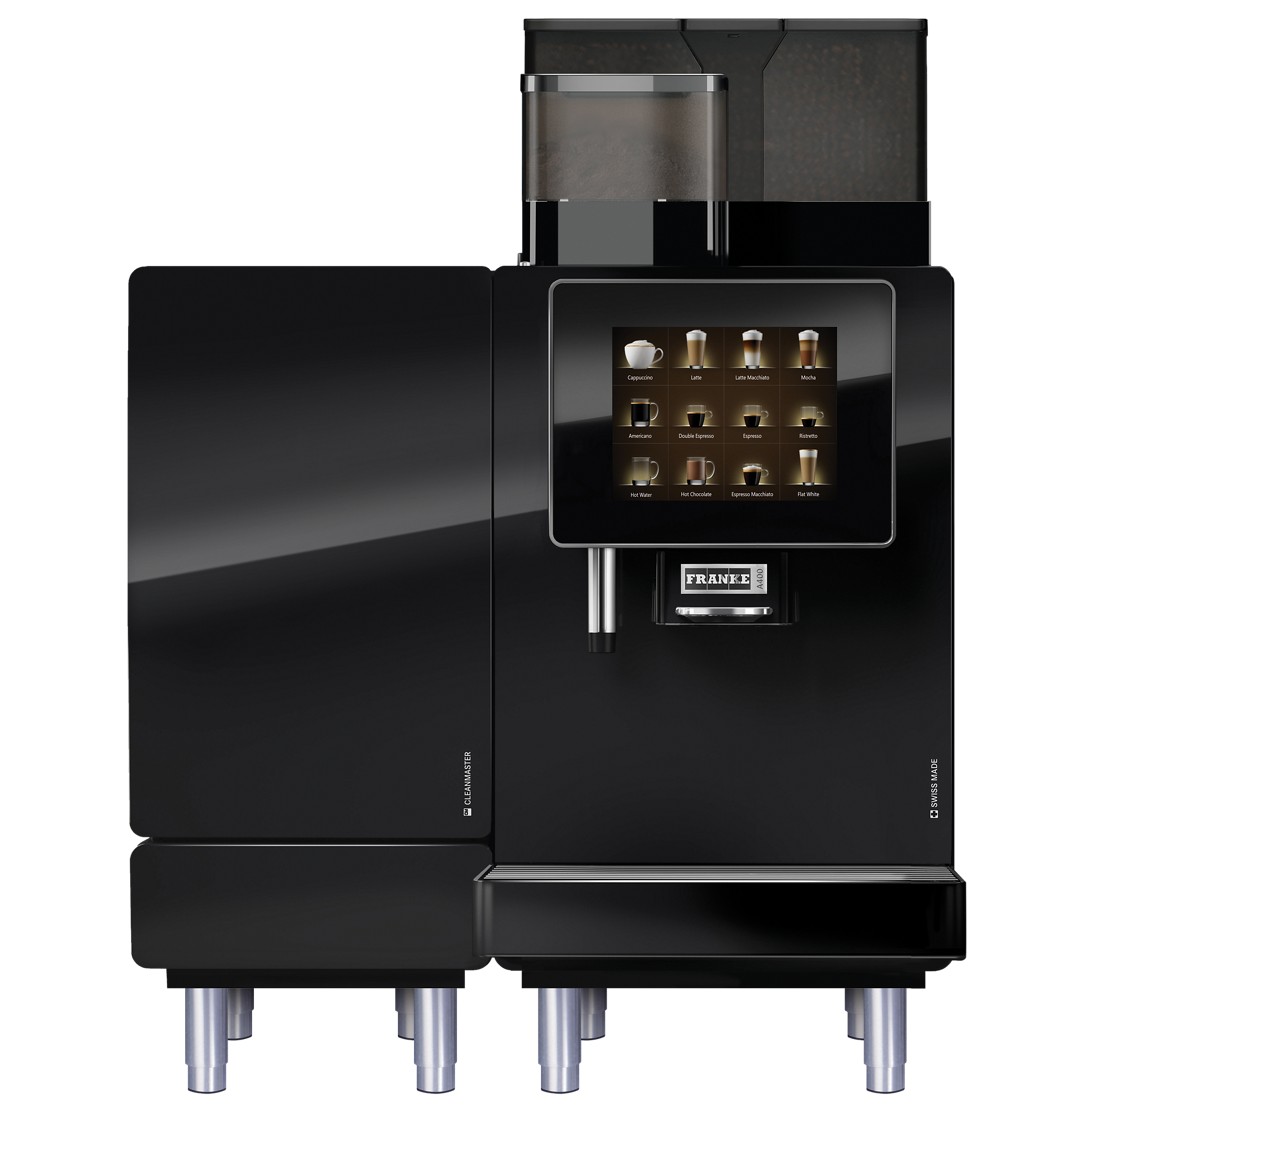 Coffee Machine for Office: Fully Automatic Coffee Machine- Unifrost